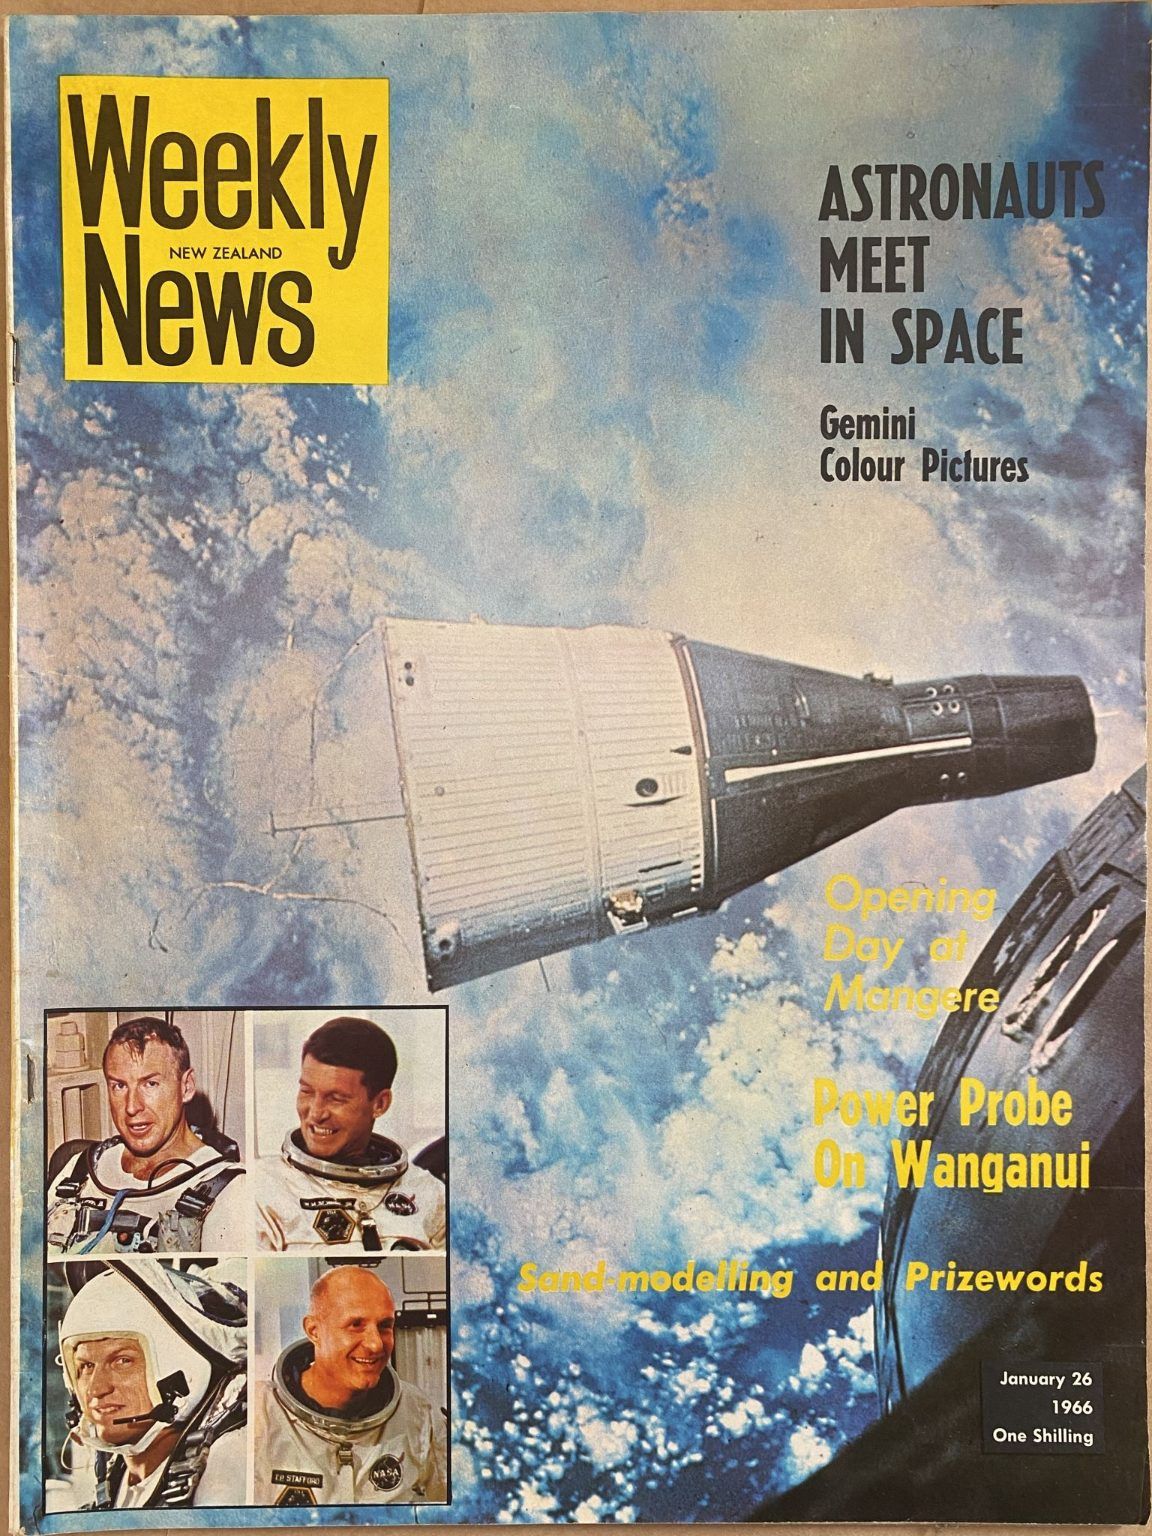 OLD NEWSPAPER: New Zealand Weekly News, No. 5331, 26 January 1966